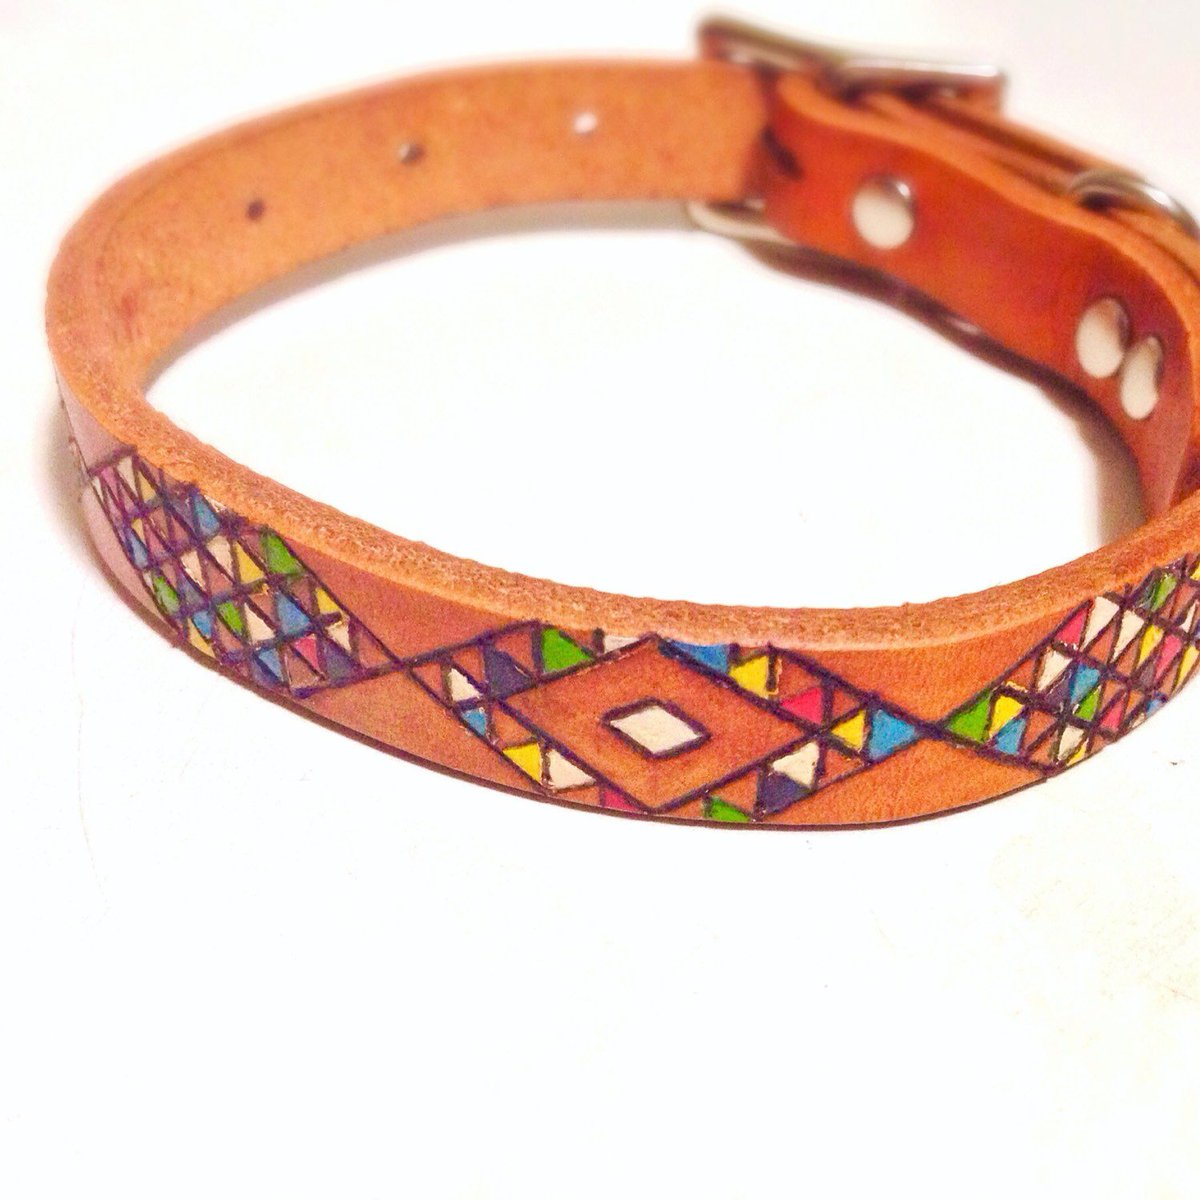 ★★★★★ 'Love it!!! Excellent quality, customer service & product! Would definitely order from this shop again!!:)' samantha s. etsy.me/2ofx5L8 #etsy #pets  #durableleather #puppylove  #dogs #geometric